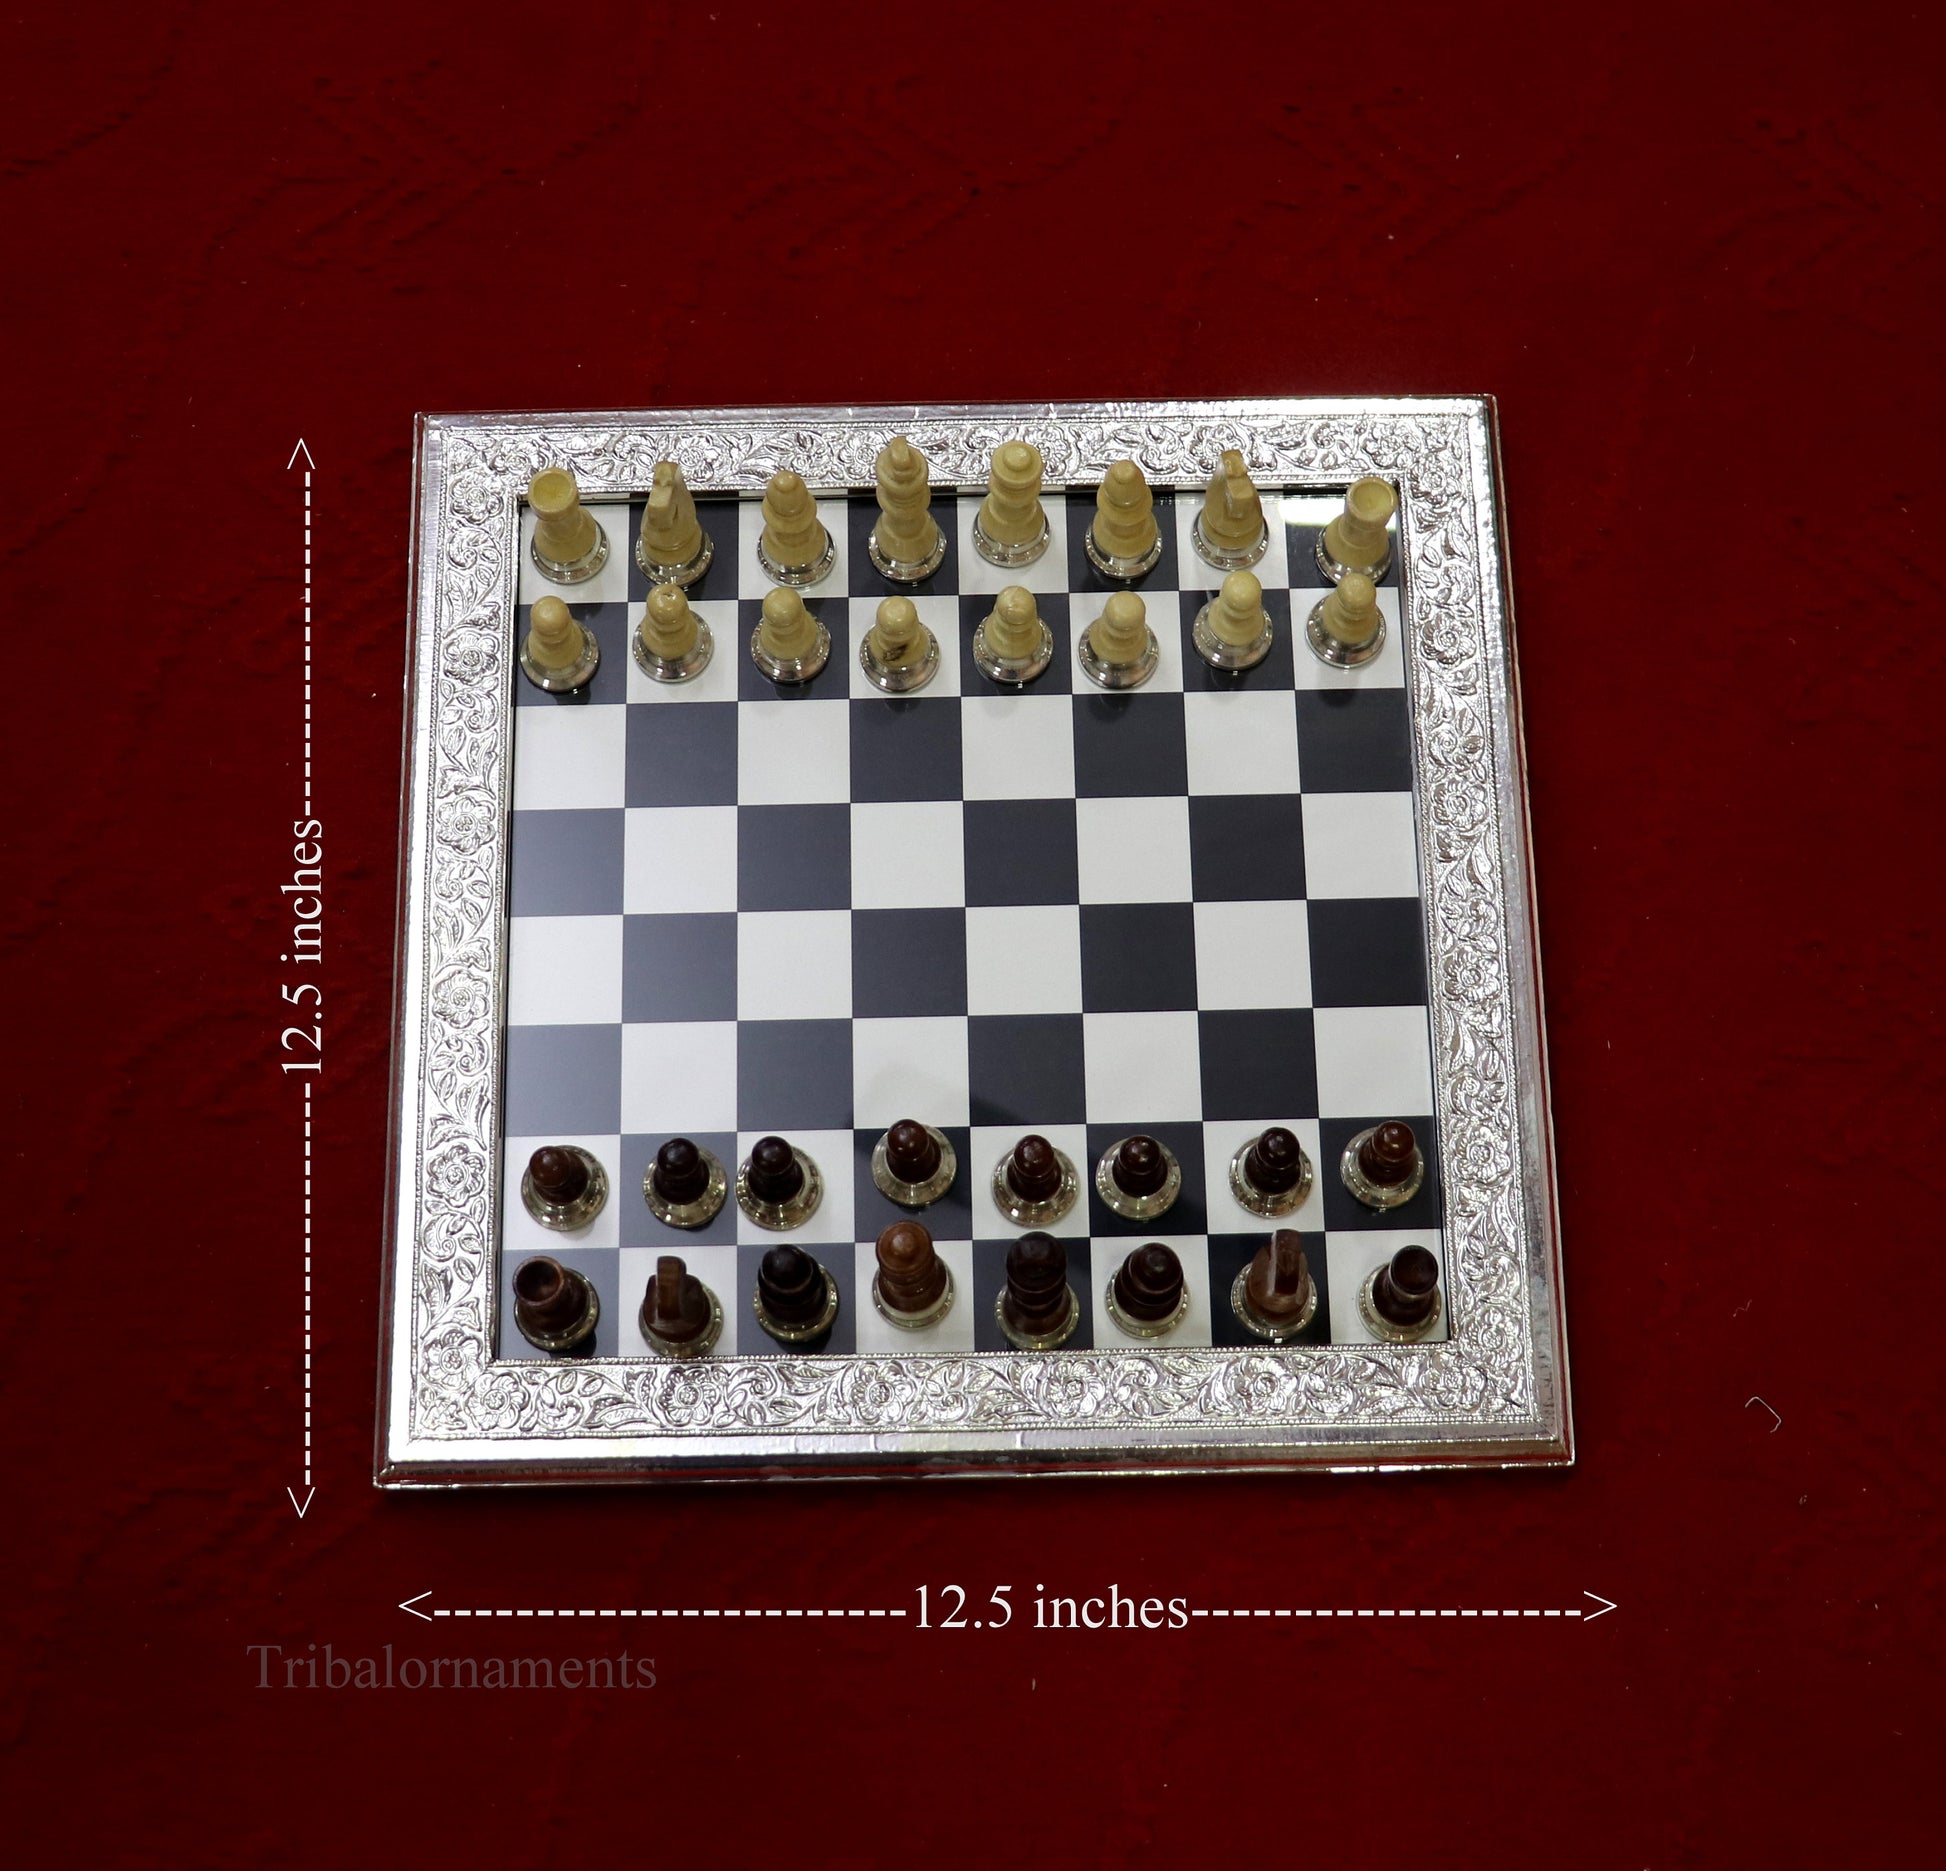 925 sterling silver work chessboard, Amazing customized handcrafted design on wooden base, fabulous Royal silver article from india fr04 - TRIBAL ORNAMENTS